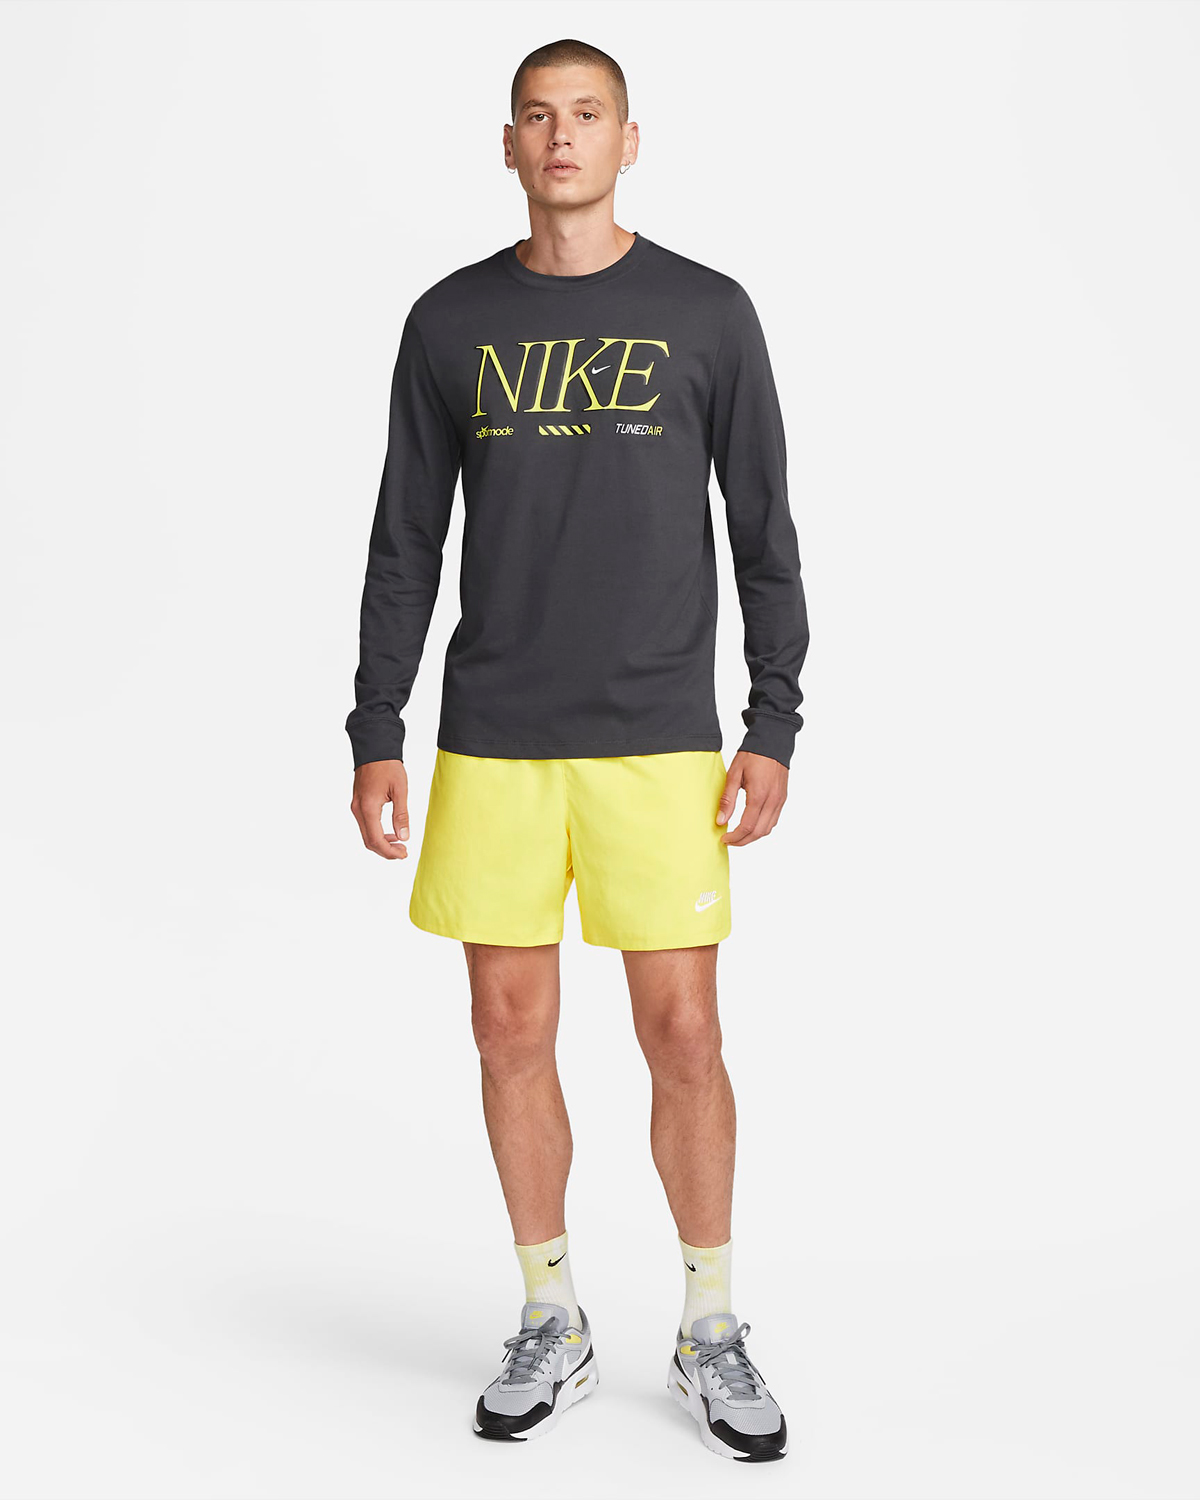 Nike-Sportswear-Long-Sleeve-T-Shirt-Anthracite-Outfit